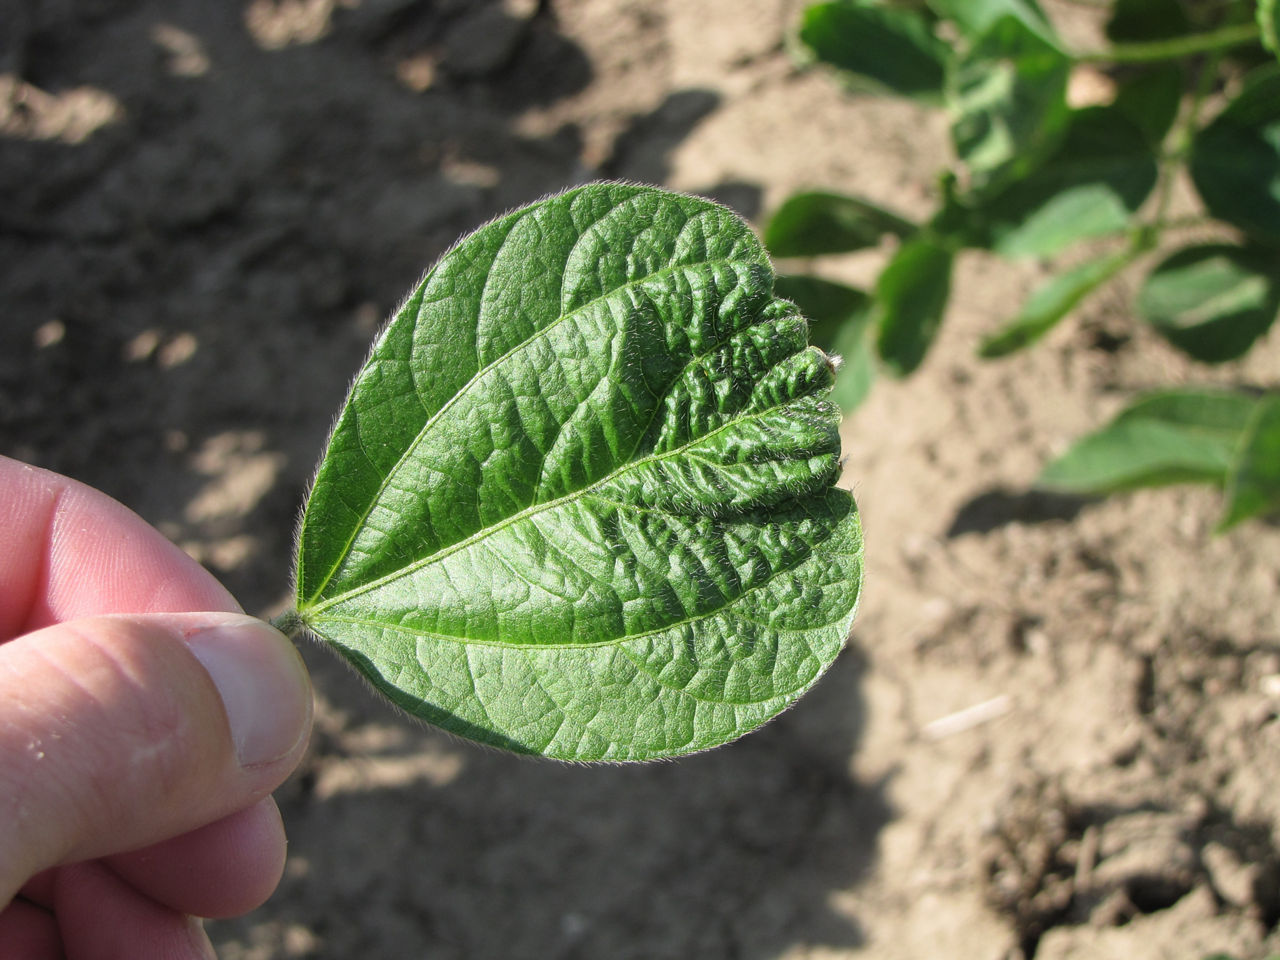 Acetochlor injury to soybean.